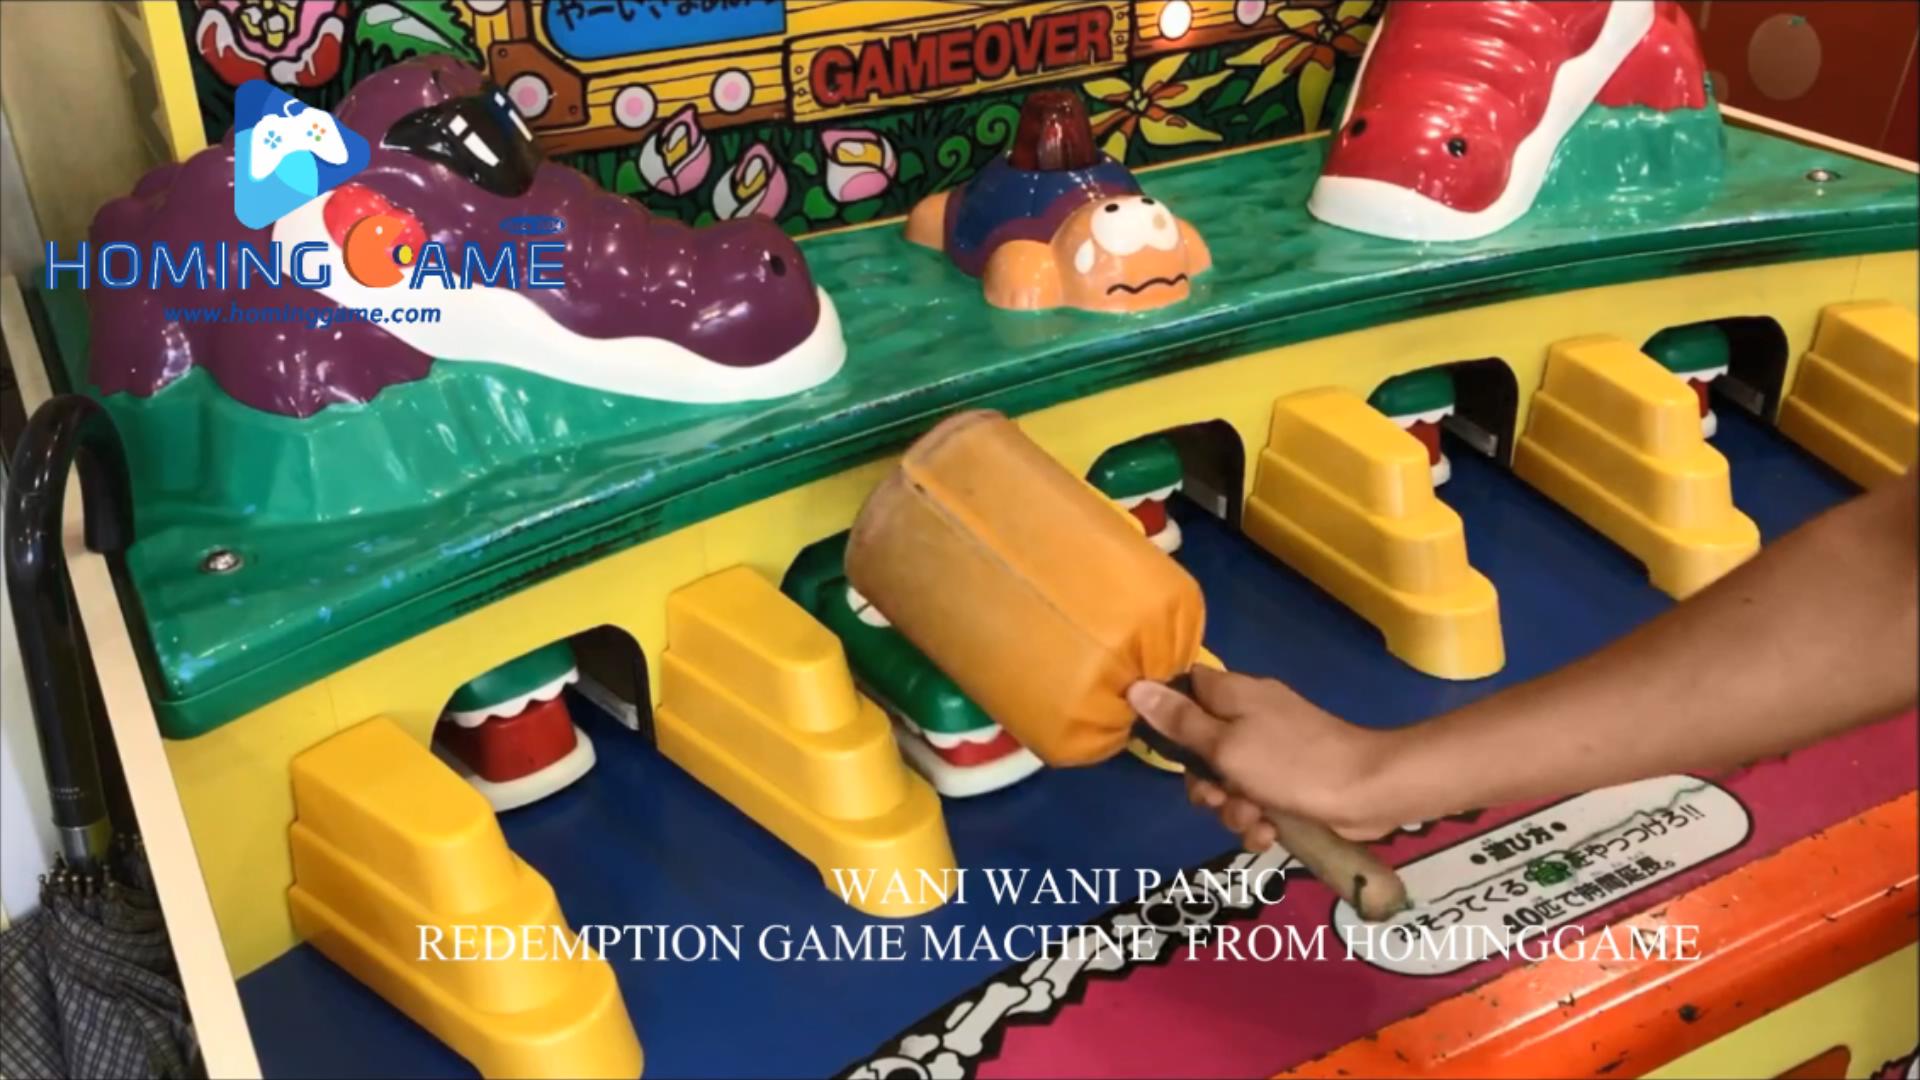 2020 Take Your Kids come to Kids Game center to paly HomingGame Classic Coin Operated Whacky Wani Wani Pani Redemption Game Machine Hit Crocodile Game(Order Call Whatsapp:+8618688409495),Whacky Wani Wani Panic,wanic wanic panic arcade game machine,whacky wani wani panic redemption game machine,hit crocodile arcade game machine,hit hammer arcade game machine,game machine,coin operated game machine,indoor game machine,electircal game machine,amusement park game equipment,hominggame,www.gametube.hk,indoor game machine,family entertainment game machine,entertainment game machine,amusement machine,redemption game machine,lottery game machine